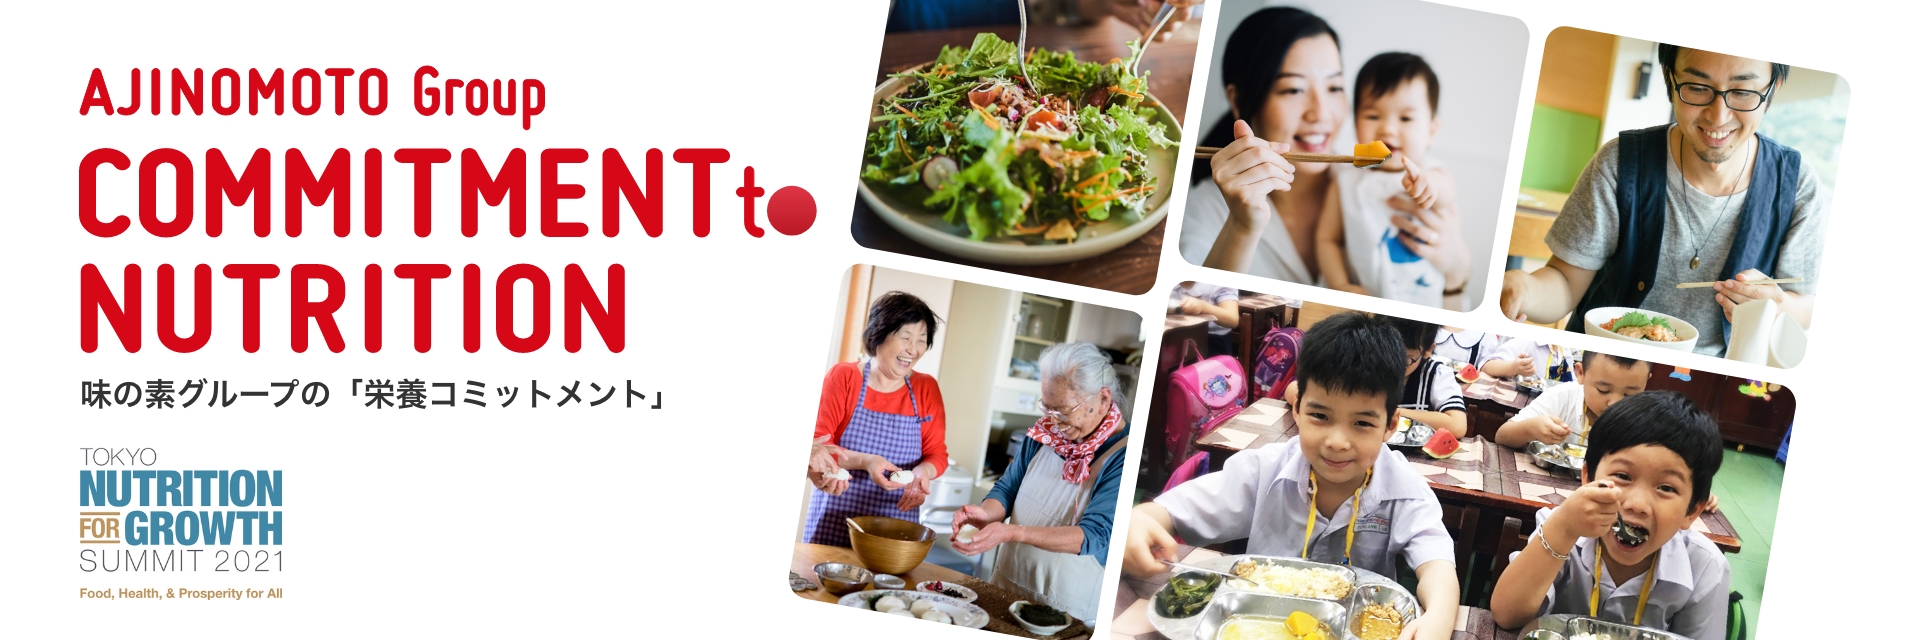 AJINOMOTO Group COMMITMENT to NUTRITION 味の素グループの「栄養コミットメント」（別ウィンドウで開く）